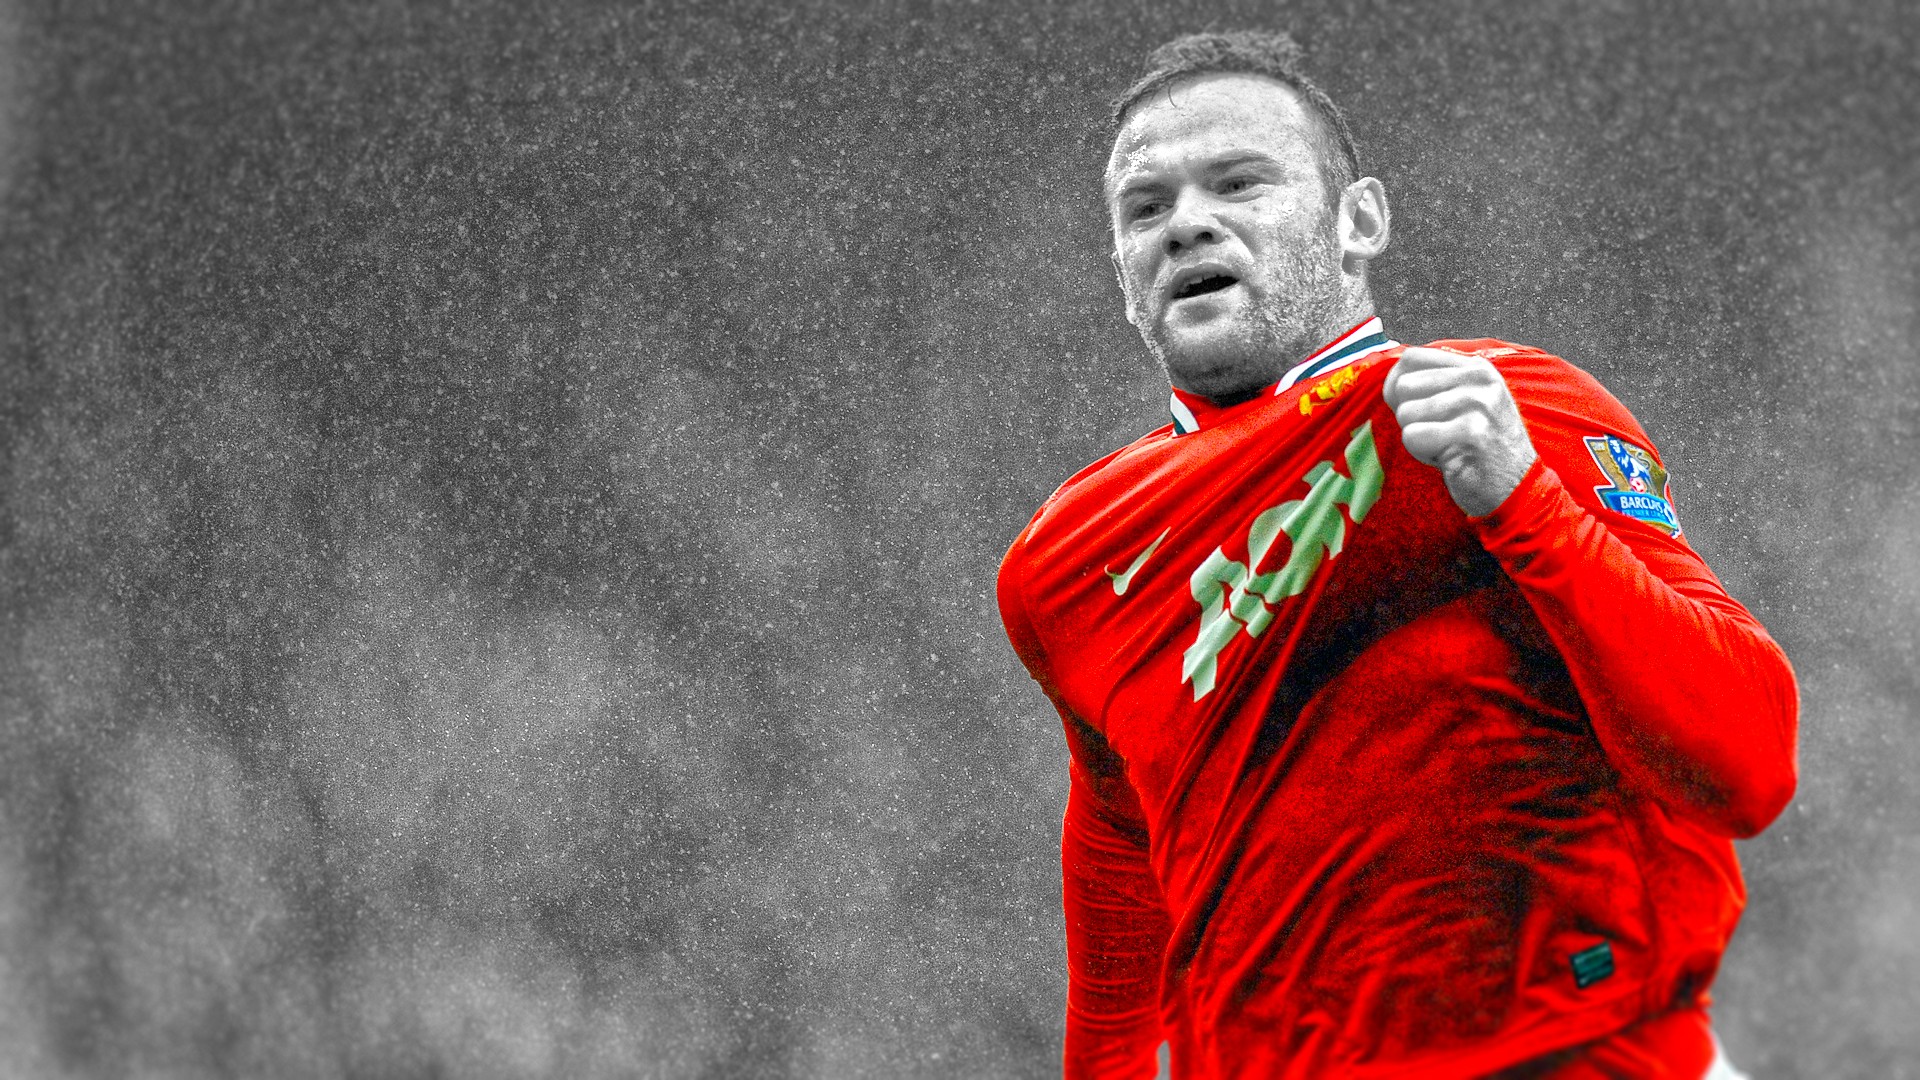 ... Wayne-Rooney-hd-picture-snowy-background ...